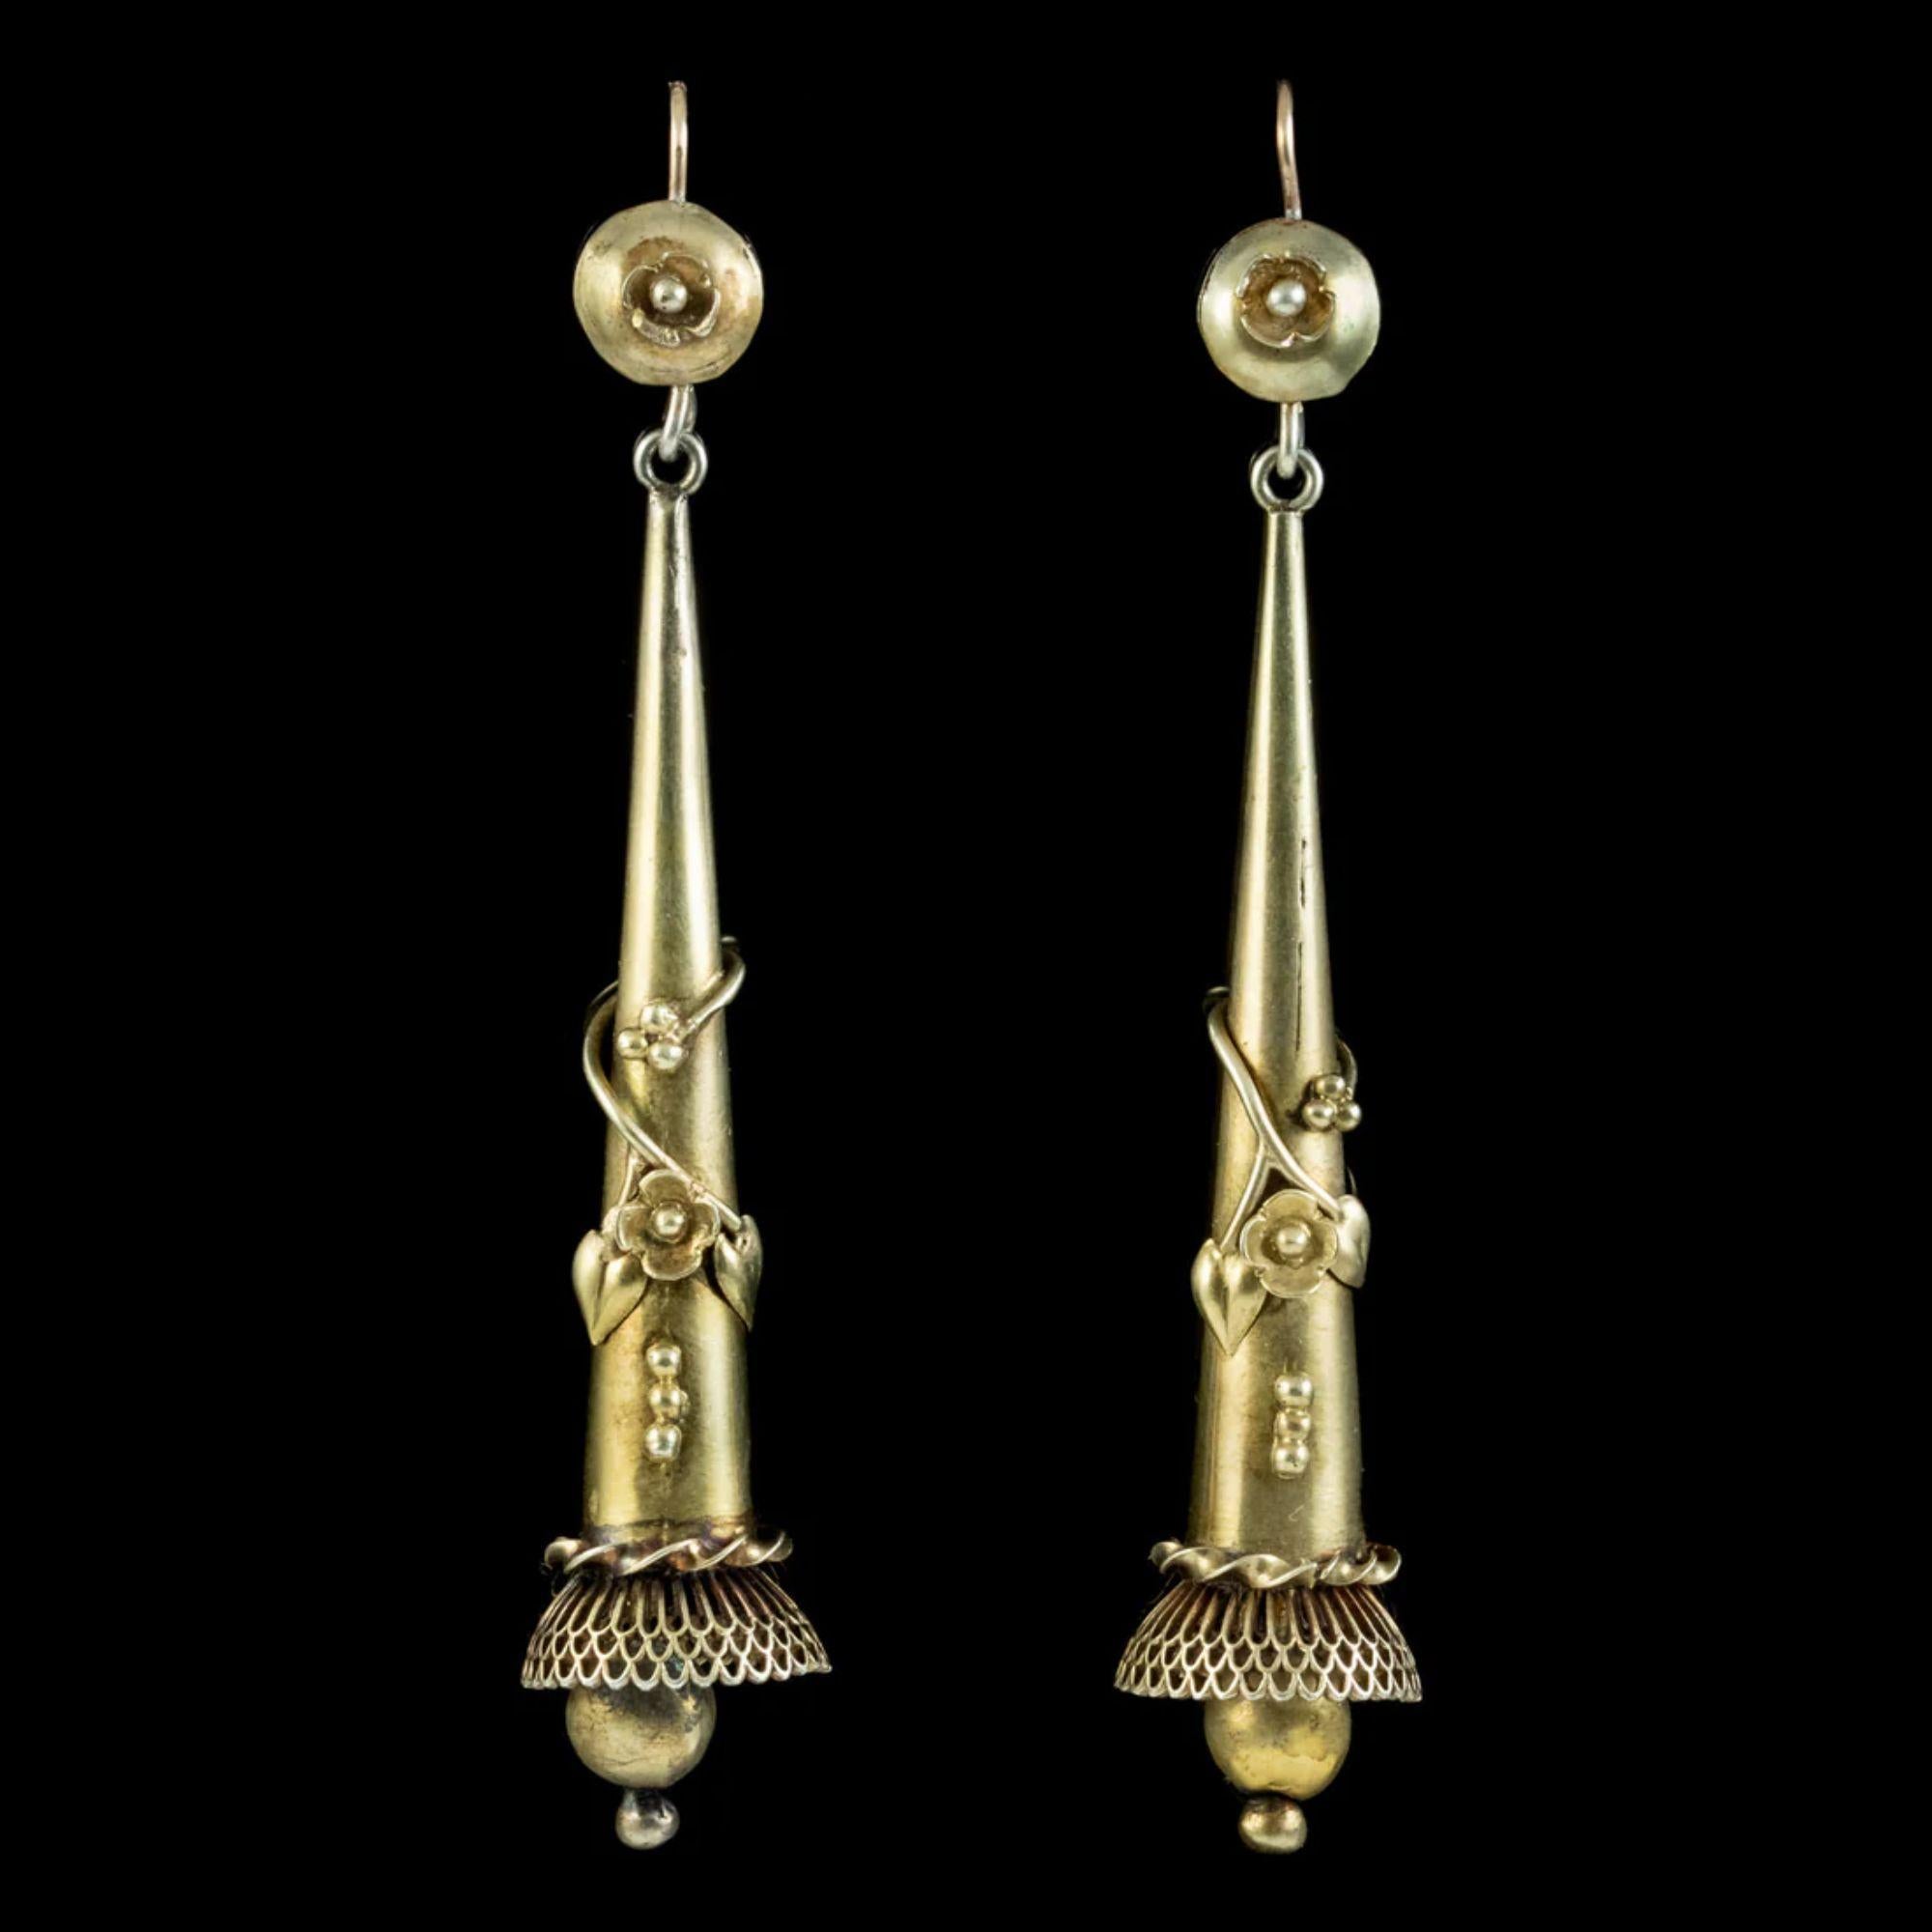 A grand pair of Antique Georgian drop earrings from the early 19th Century. Both feature beautiful floral metalwork wrapping around each long dropper leading to an ornate, fringe below with a golden ball dropper. 

Both earrings are modelled in